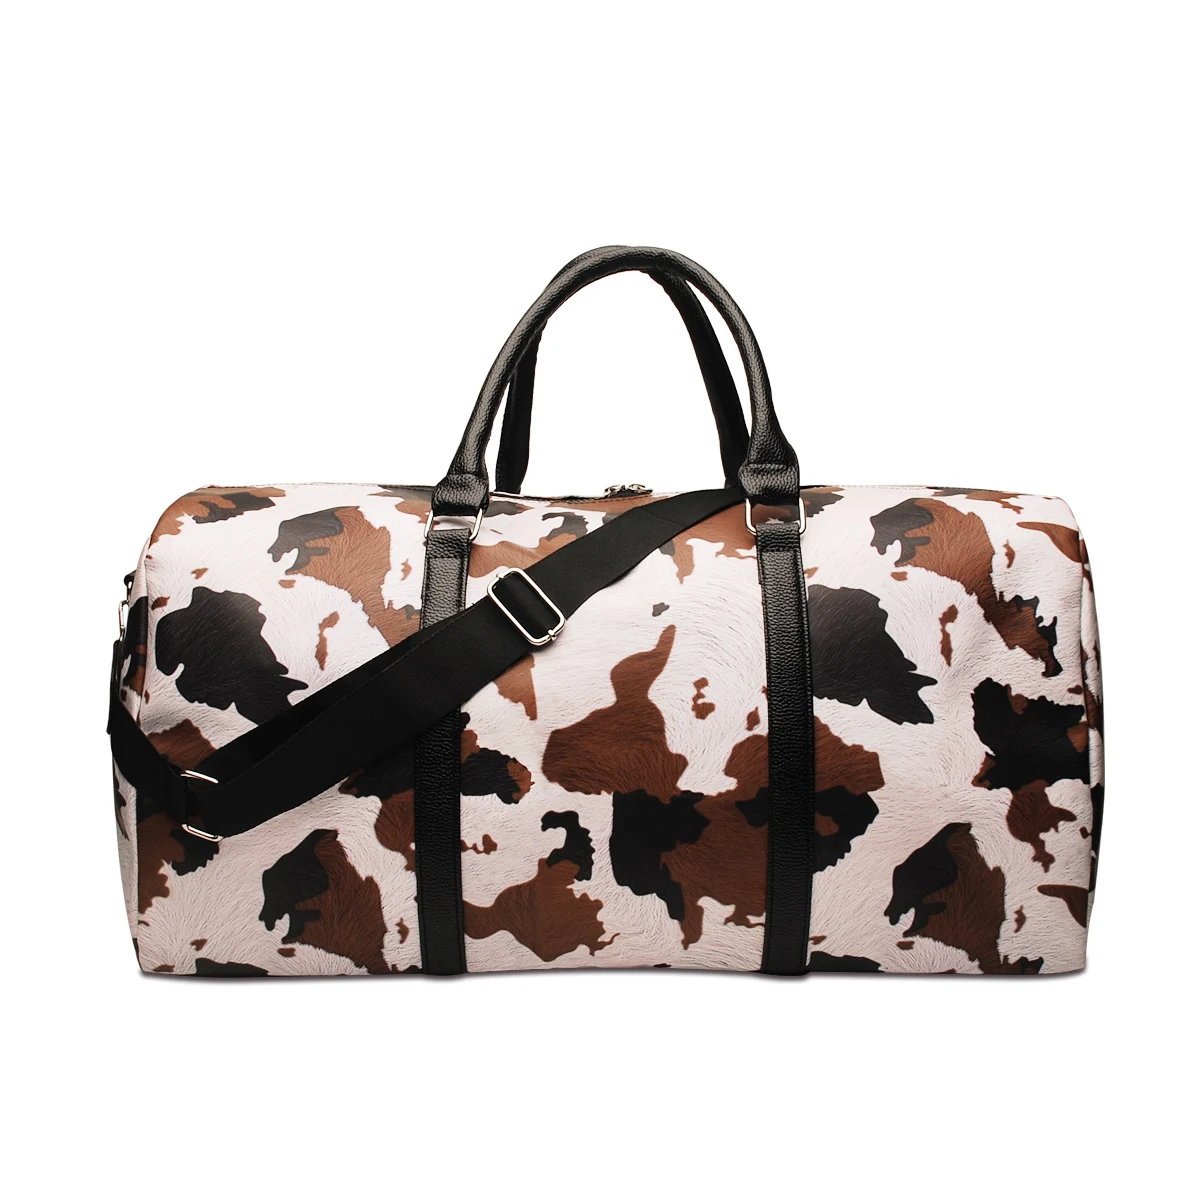 

Domil High Quality Brown and White Leather Duffel Bag Large Cowhide Travel Bag Cow Hide Weekend Overnight Bag DOM112-1065, Black